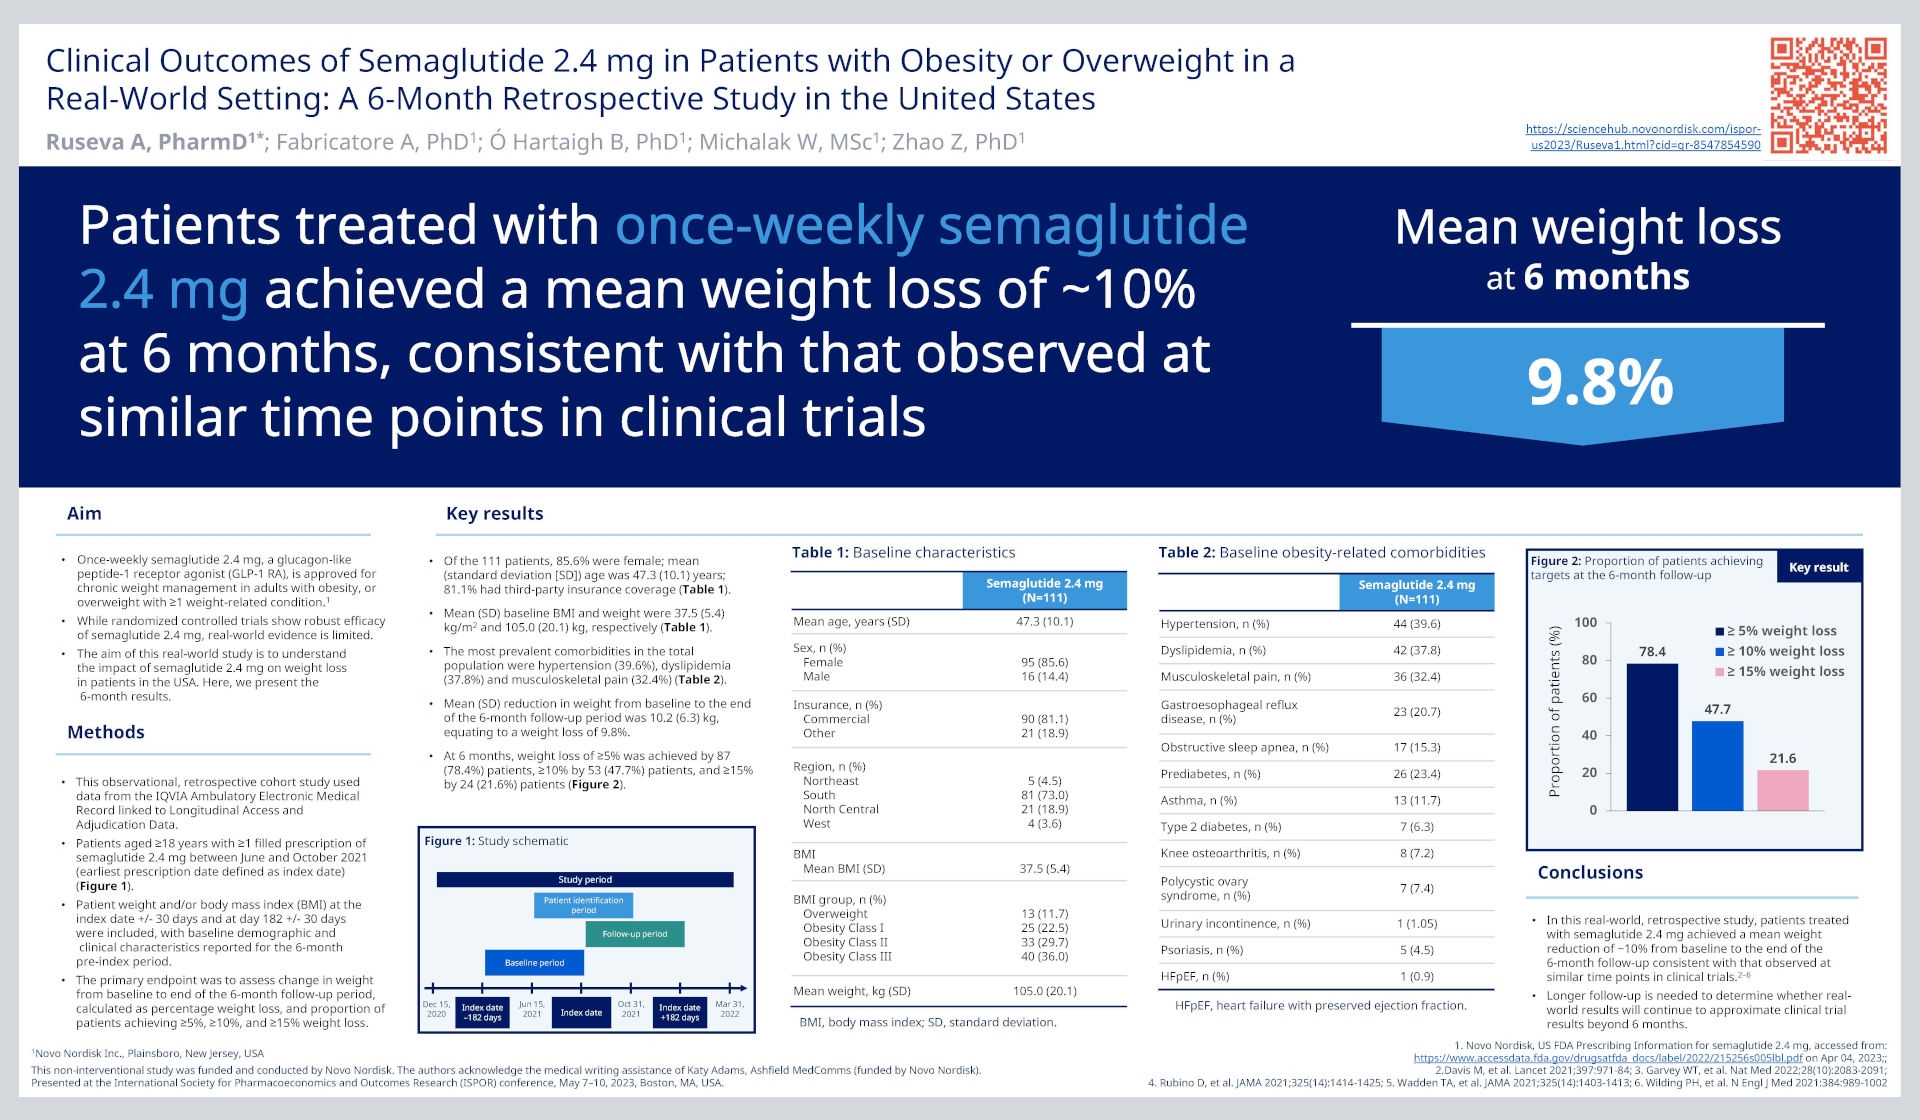 Clinical Outcomes Of Semaglutide 2.4 mg In Patients With Obesity Or Overweight In A Real-World Setting: A 6-Month Retrospective Study In The United States - poster